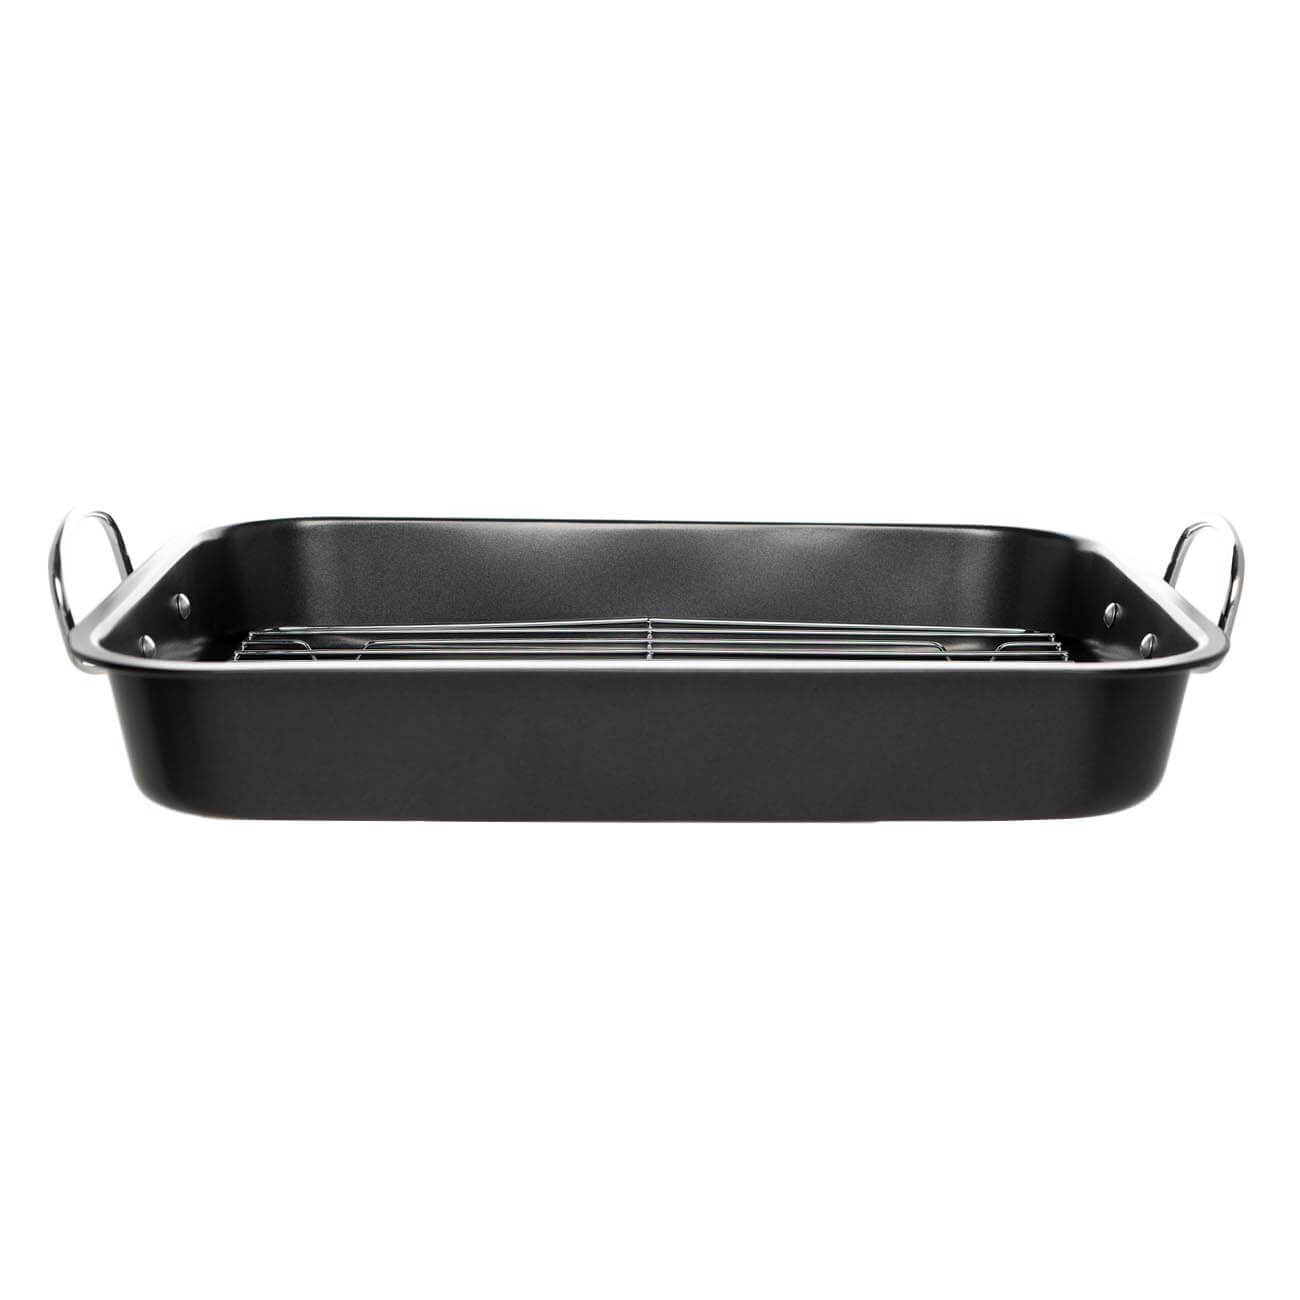 Baking tray, 37x29 cm, with handles and grill, coated, steel, black, BBQ изображение № 1